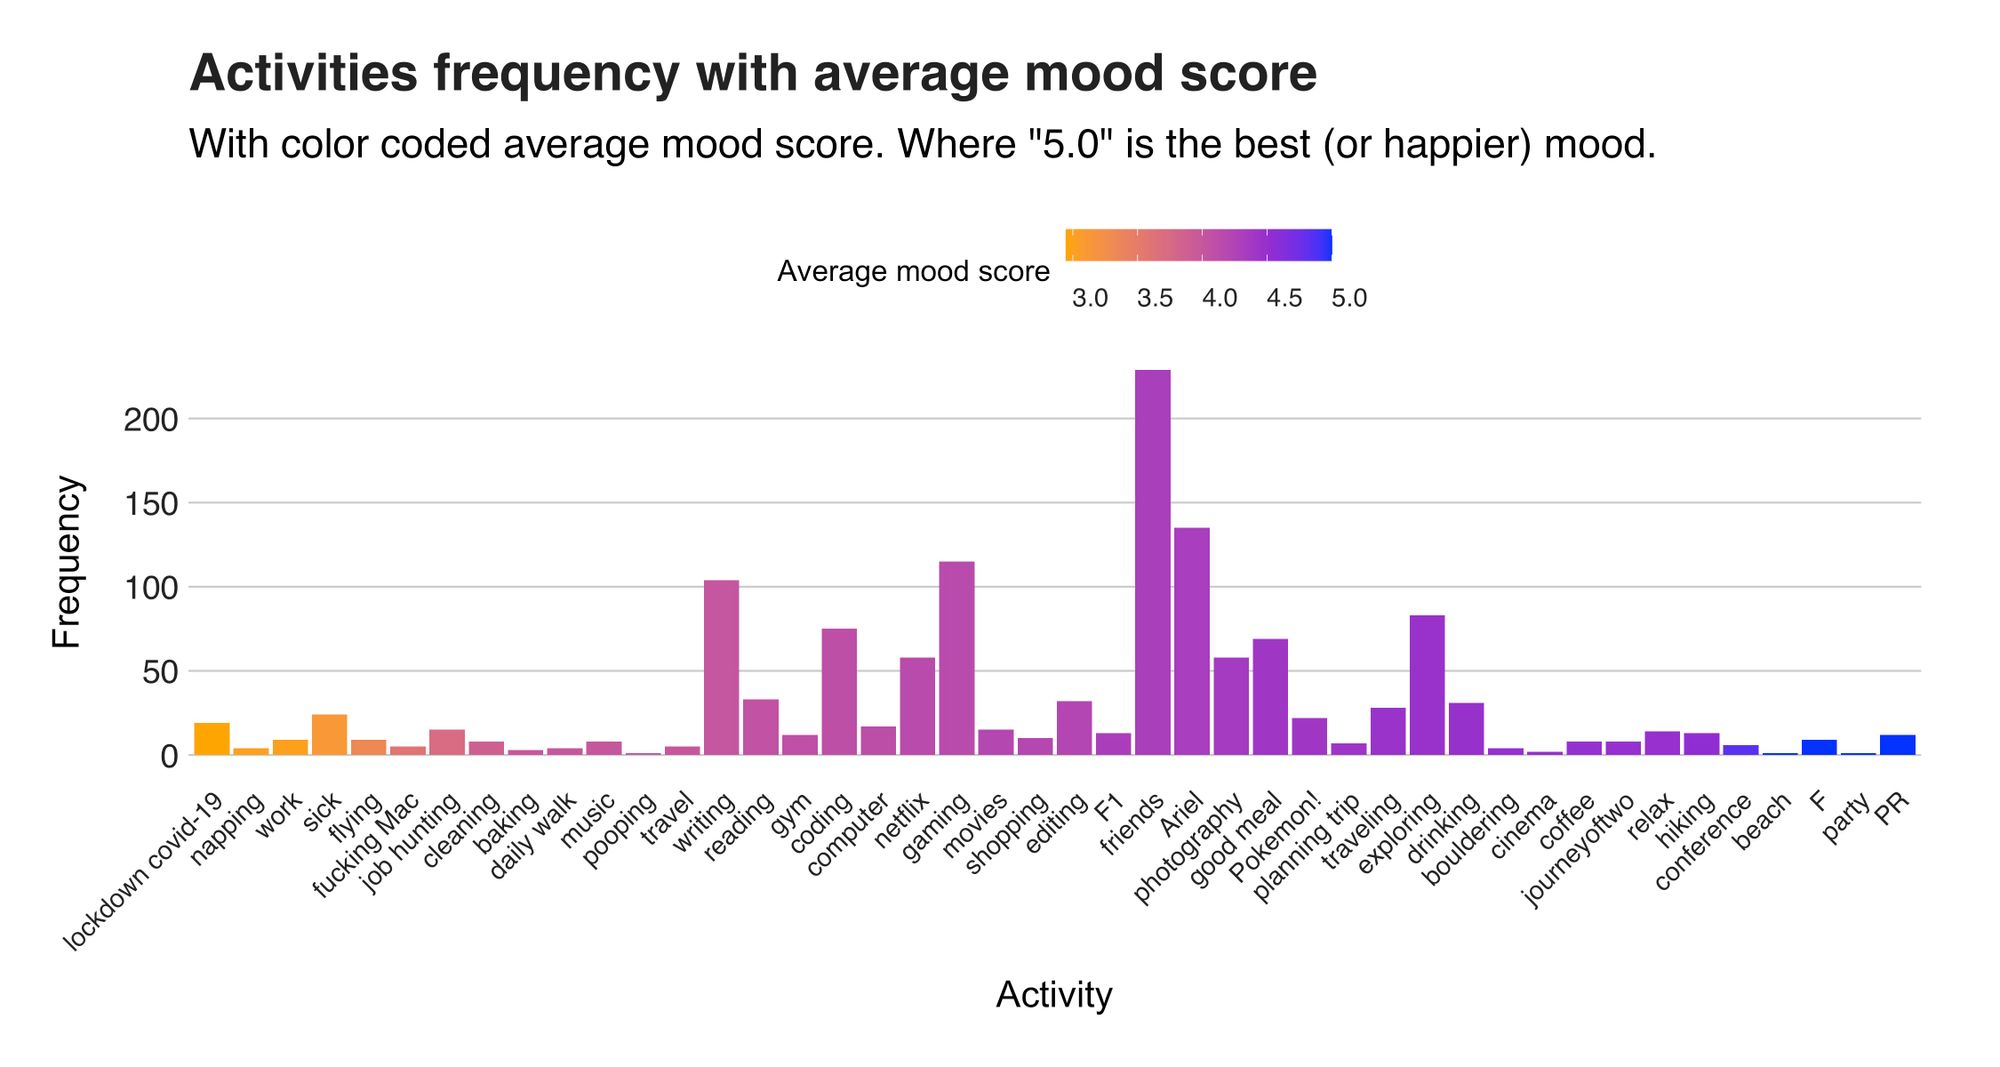 Figure 4. Activities, their frequency, and average mood score.